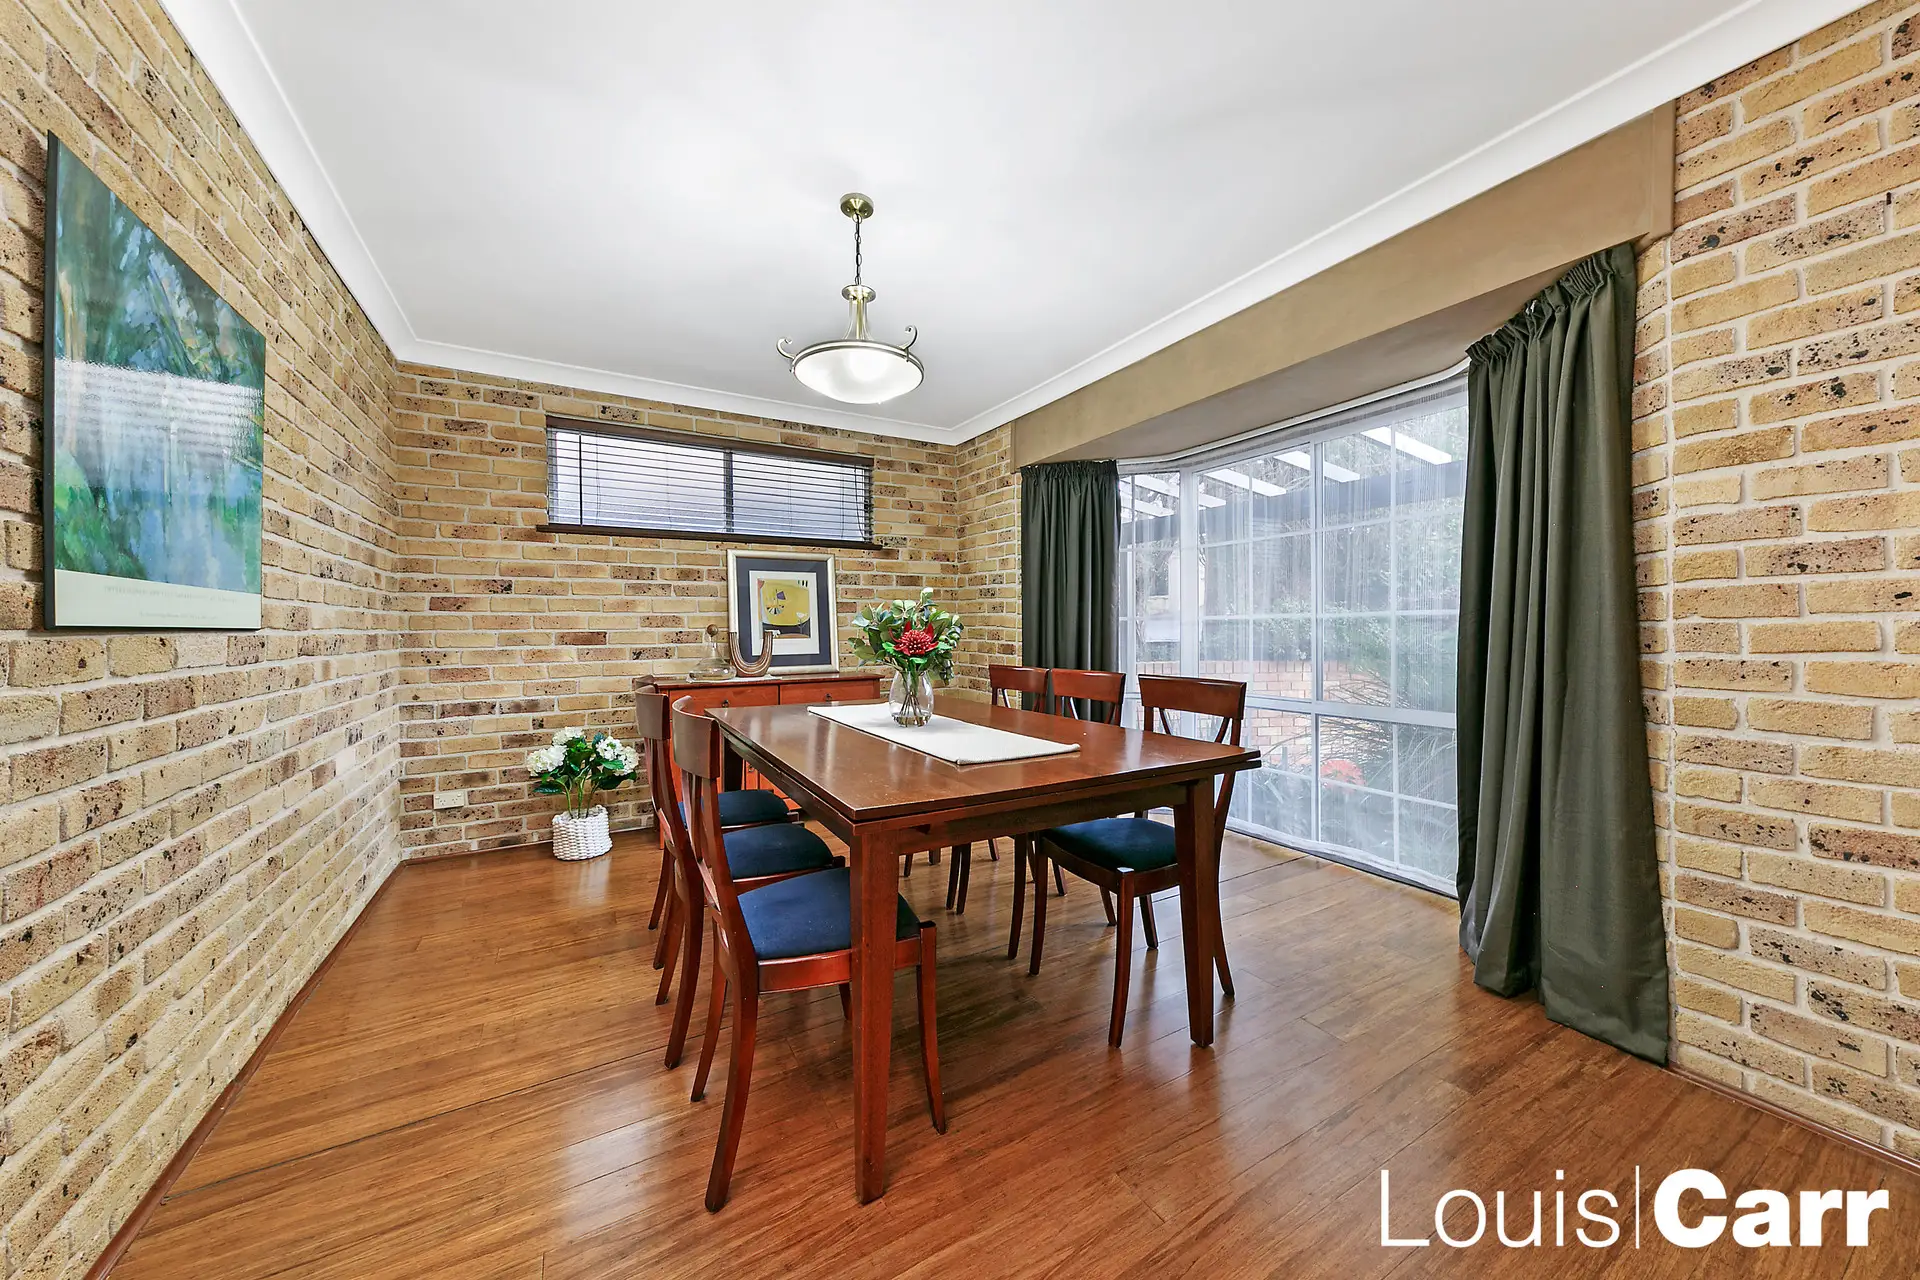 Photo #8: 29 Fullers Road, Glenhaven - Sold by Louis Carr Real Estate